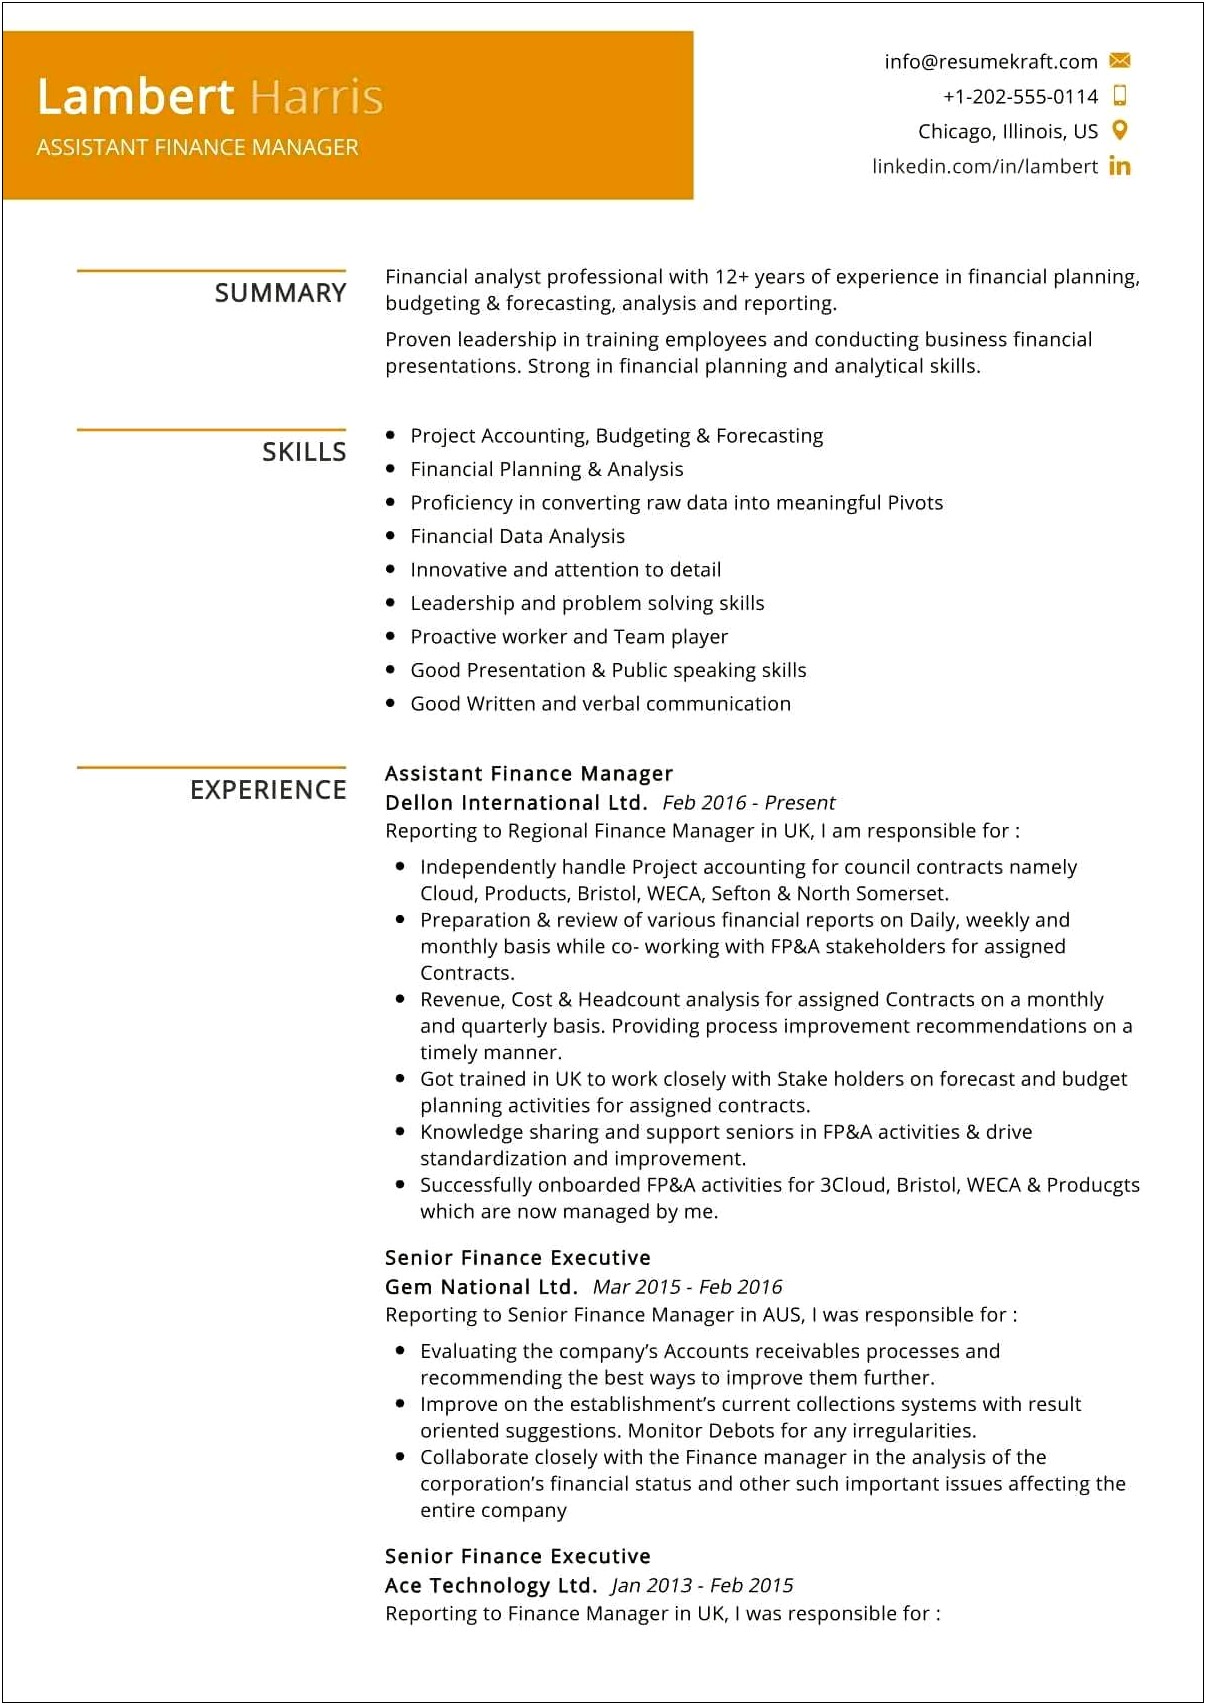 Job Skills For Assistant Manager Resume